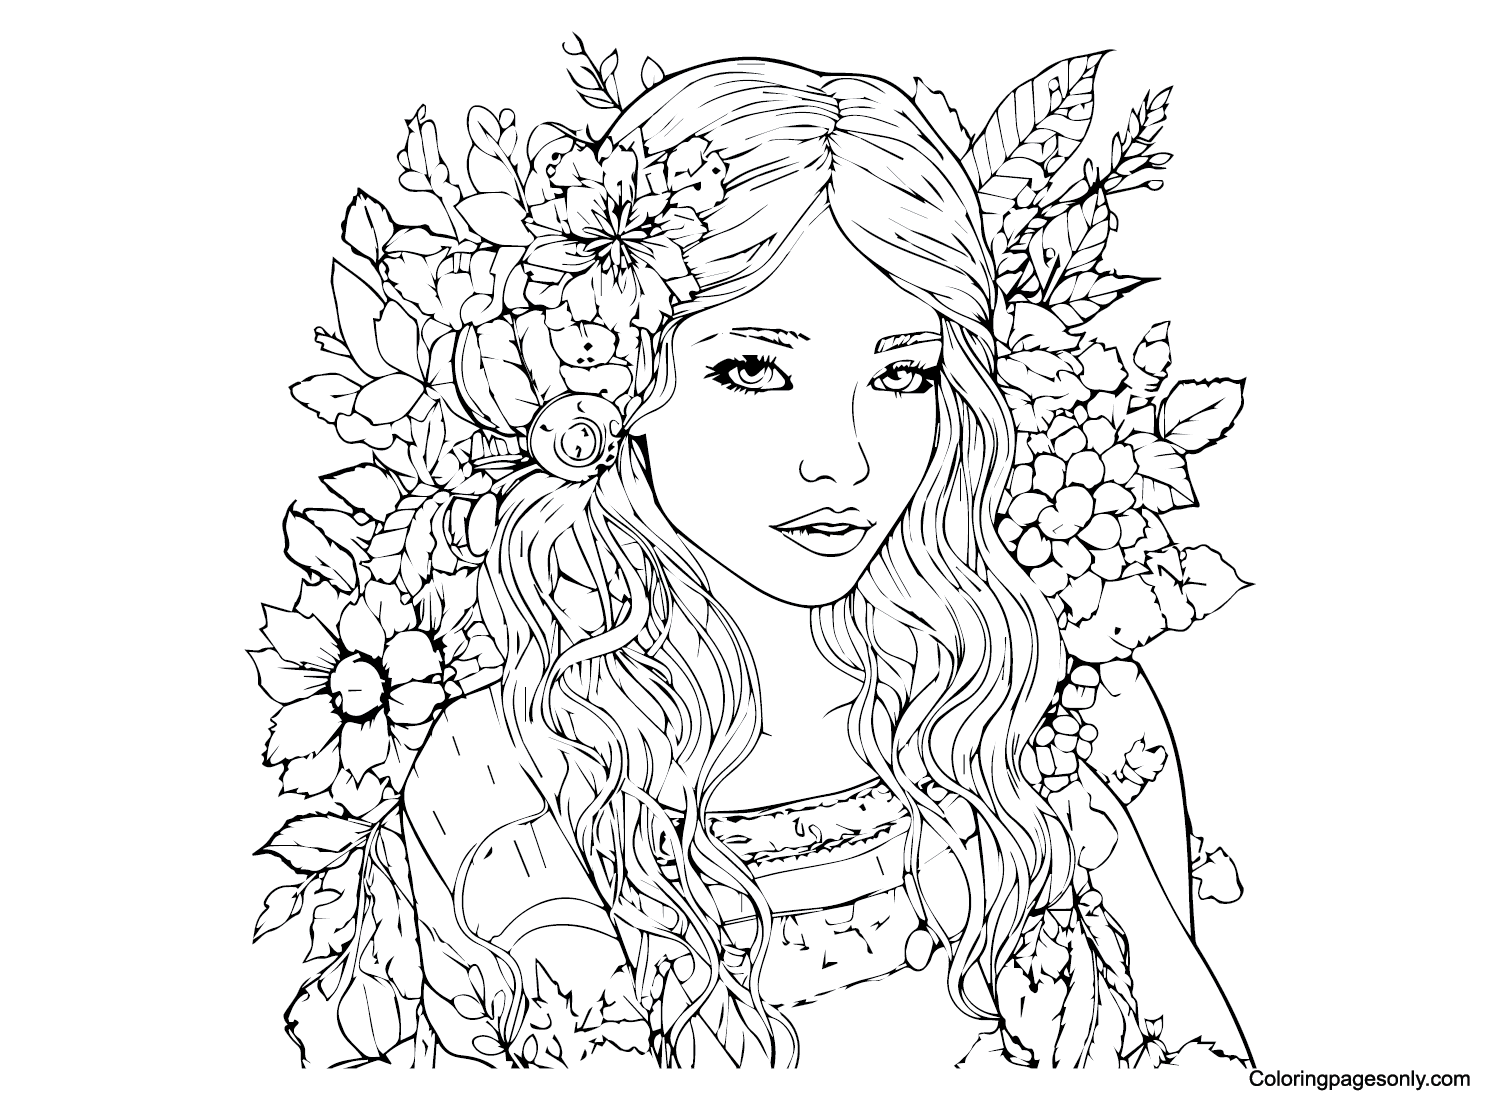 Free Teenage Girl Images Coloring Page